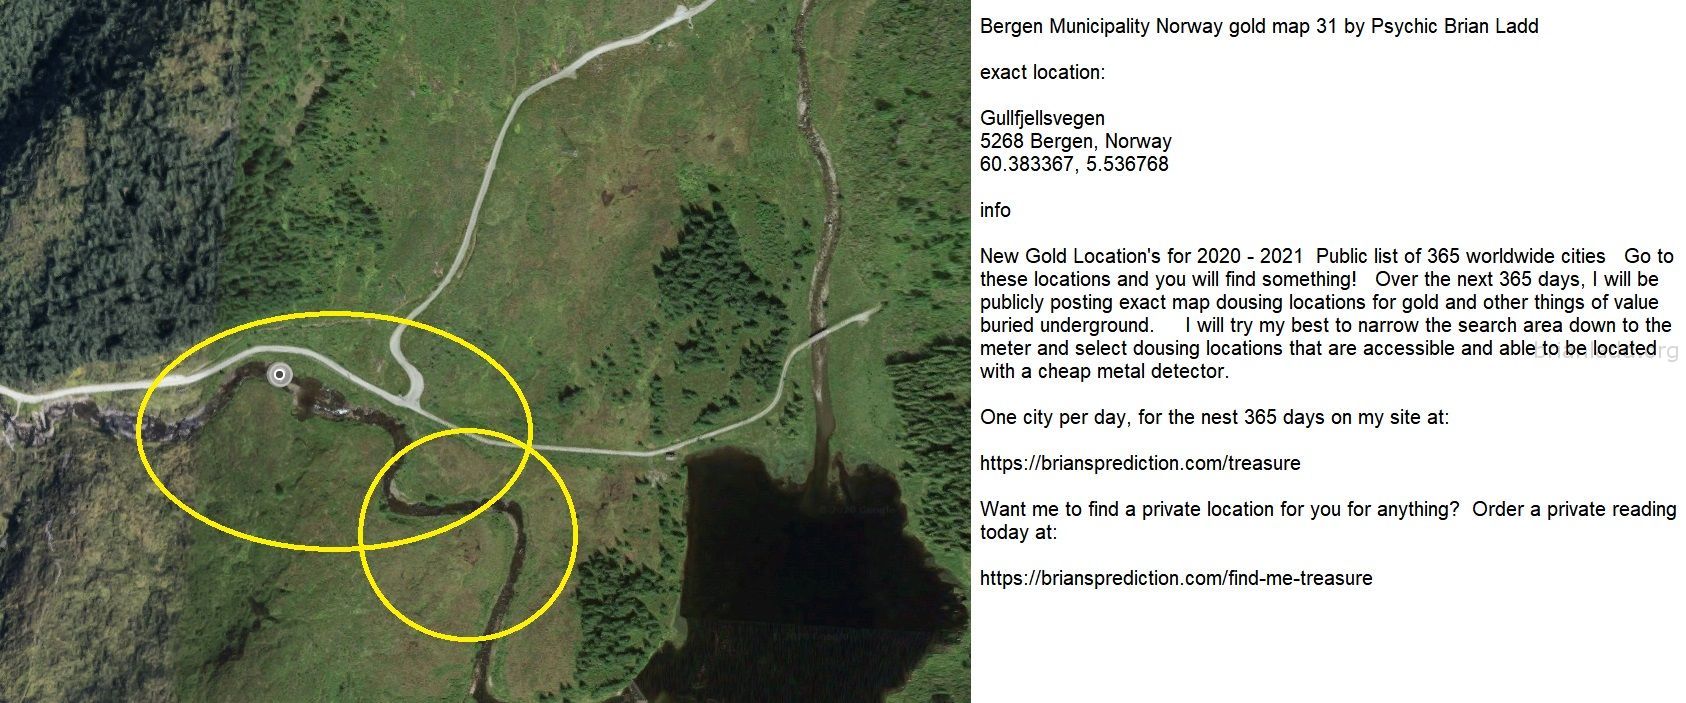 Bergen Municipality Norway Gold Map 31 By Psychic Brian Ladd - Bergen Municipality Norway Gold Map 31 By Psychic Brian L...
Bergen Municipality Norway Gold Map 31 By Psychic Brian Ladd  Exact Location:  Gullfjellsvegen  5268 Bergen, Norway  60.383367, 5.536768  Info  New Gold Location'S For 2020 - 2021  Public List Of 365 Worldwide Cities  Go To These Locations And You Will Find Something!  Over The Next 365 Days, I Will Be Publicly Posting Exact Map Dousing Locations For Gold And Other Things Of Value Buried Underground.  I Will Try My Best To Narrow The Search Area Down To The Meter And Select Dousing Locations That Are Accessible And Able To Be Located With A Cheap Metal Detector.  One City Per Day, For The Nest 365 Days On My Site At:   https://briansprediction.com/Treasure  Want Me To Find A Private Location For You For Anything?  Order A Private Reading Today At:   https://briansprediction.com/Find-Me-Treasure
